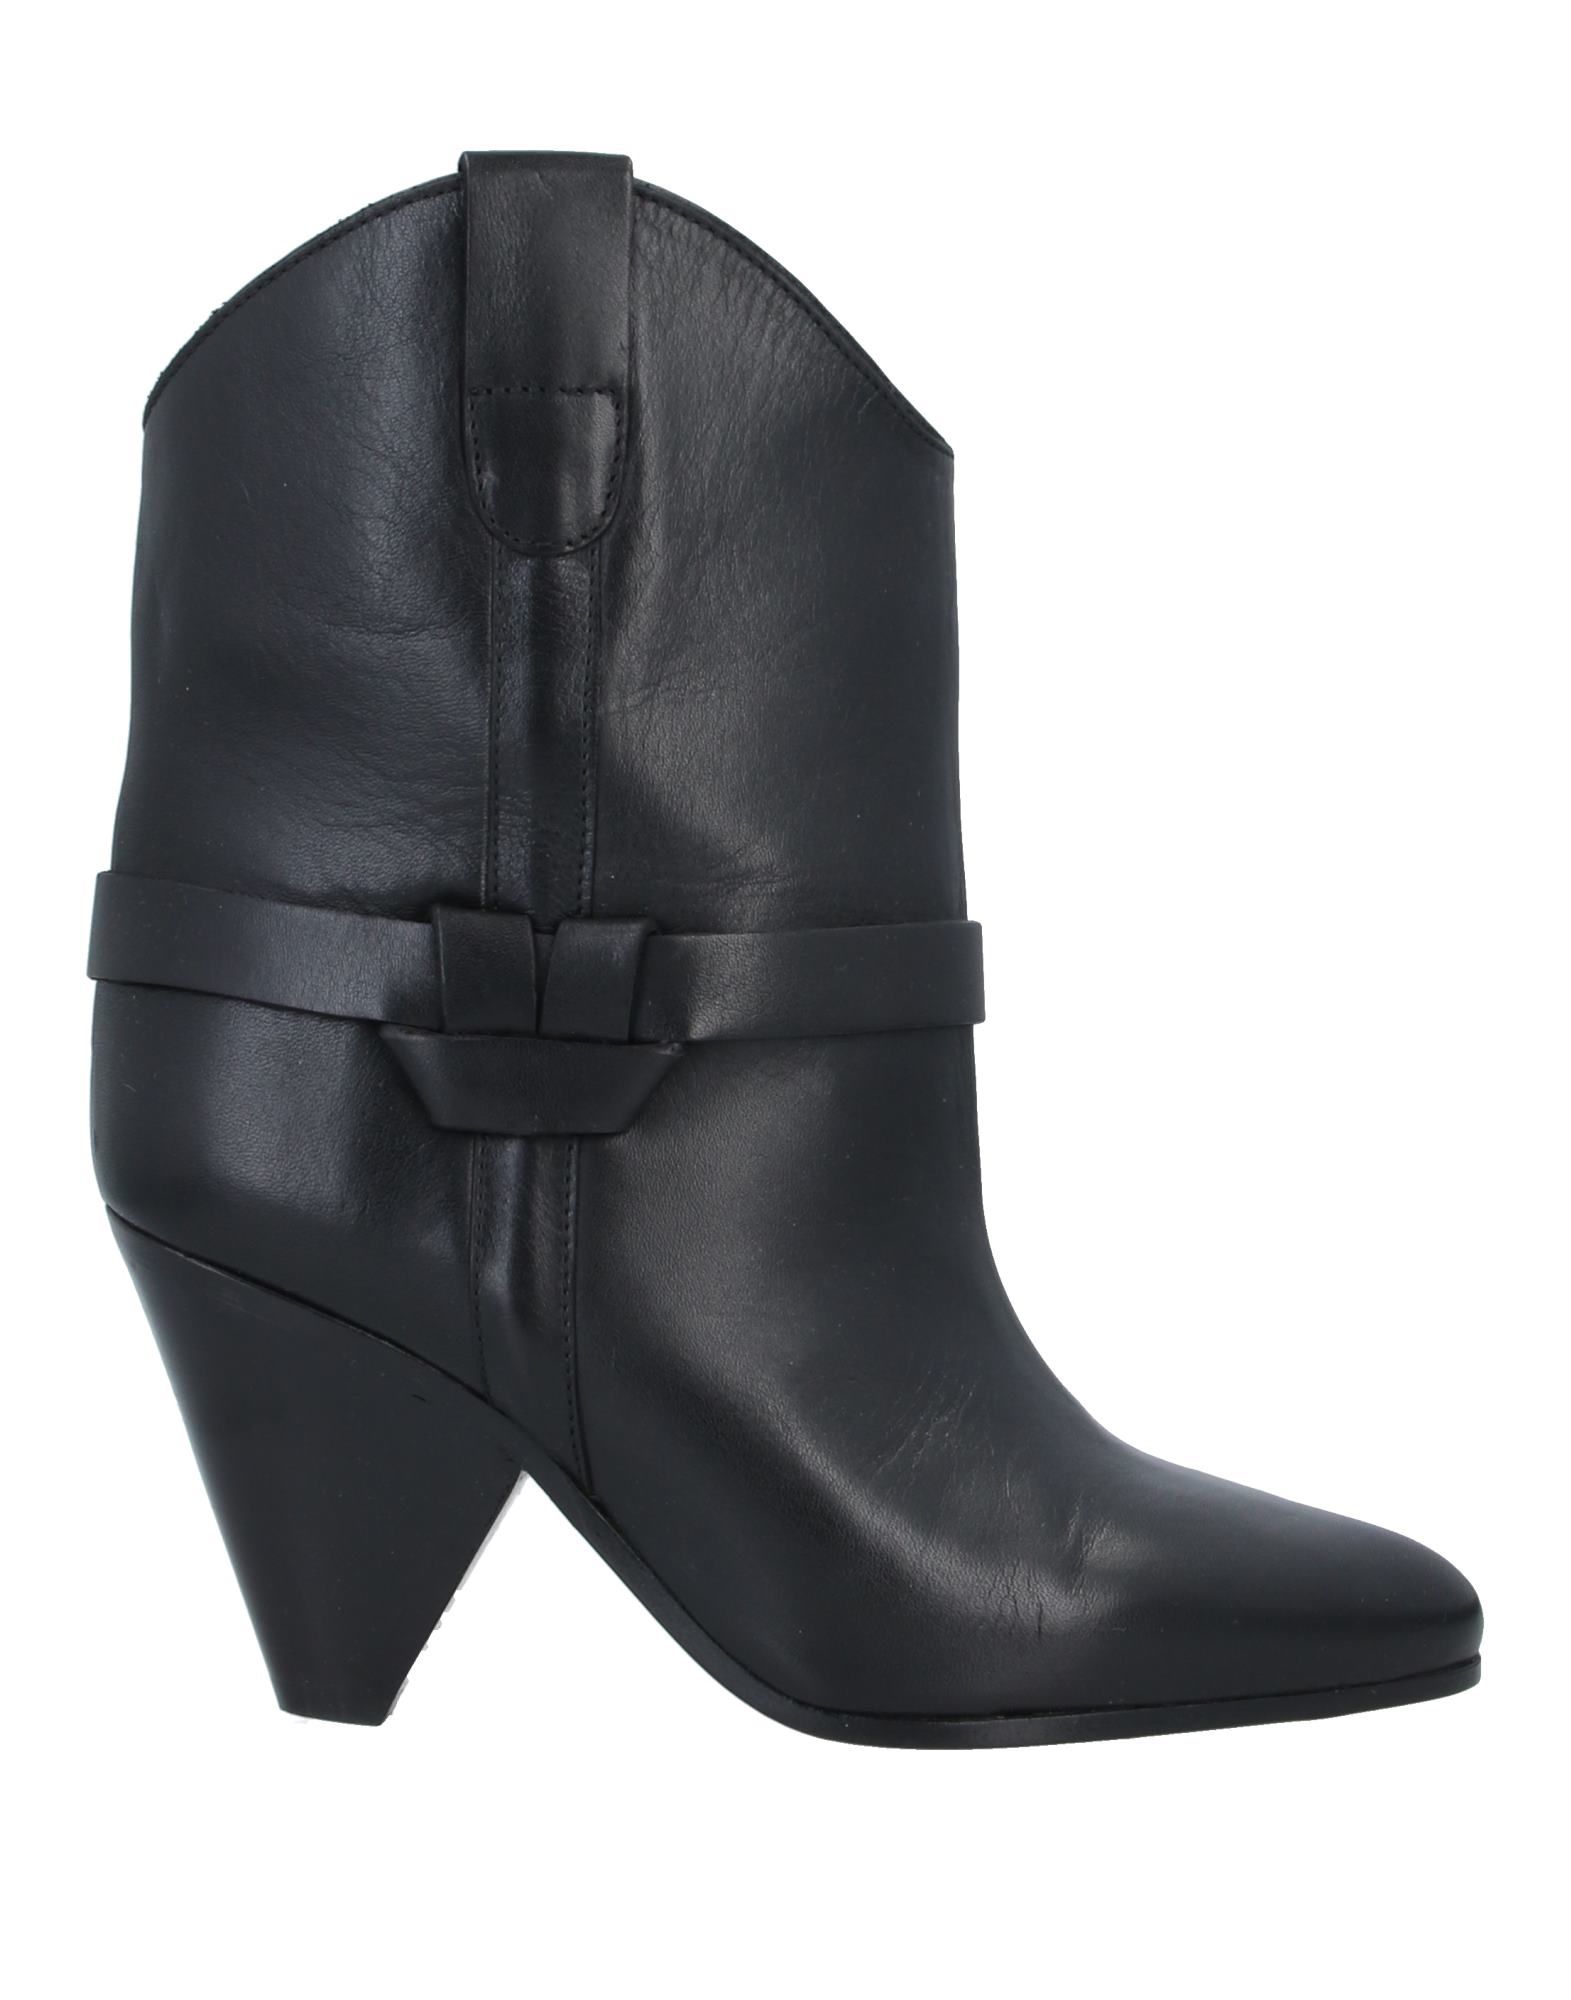 ISABEL MARANT Ankle boots - Item 11877047